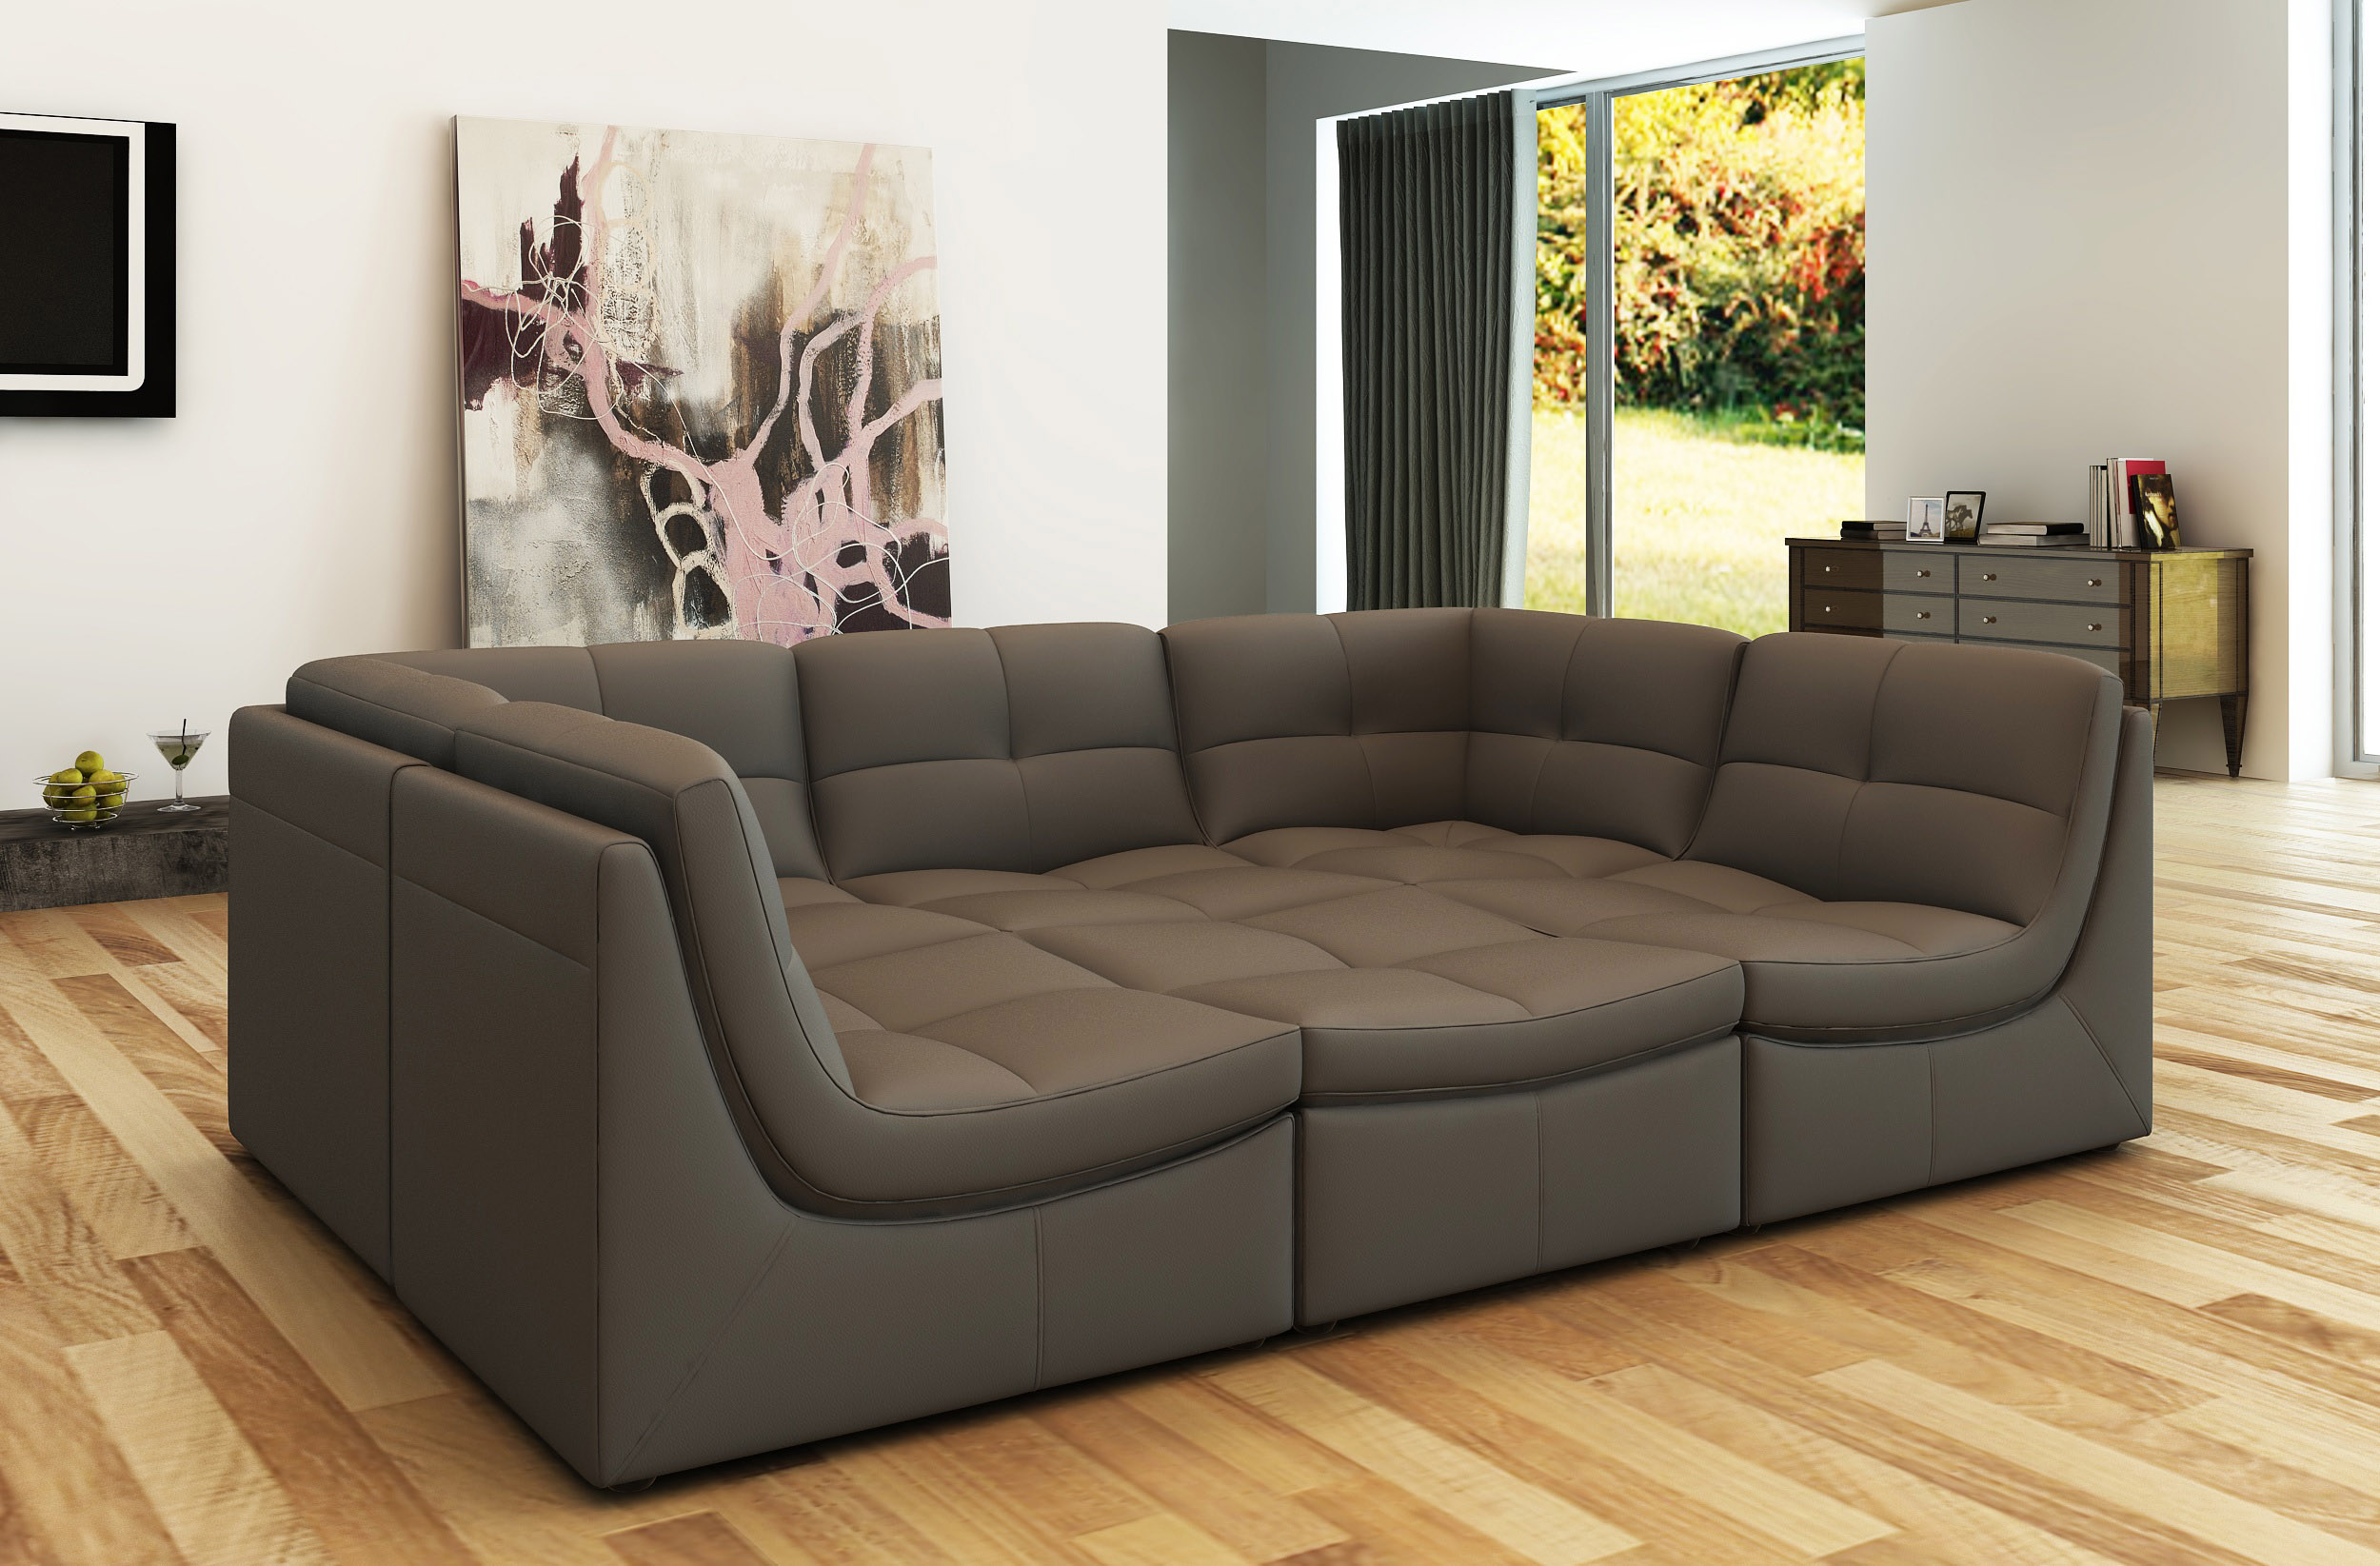 Sophisticated Italian Leather Living Room Furniture - Click Image to Close